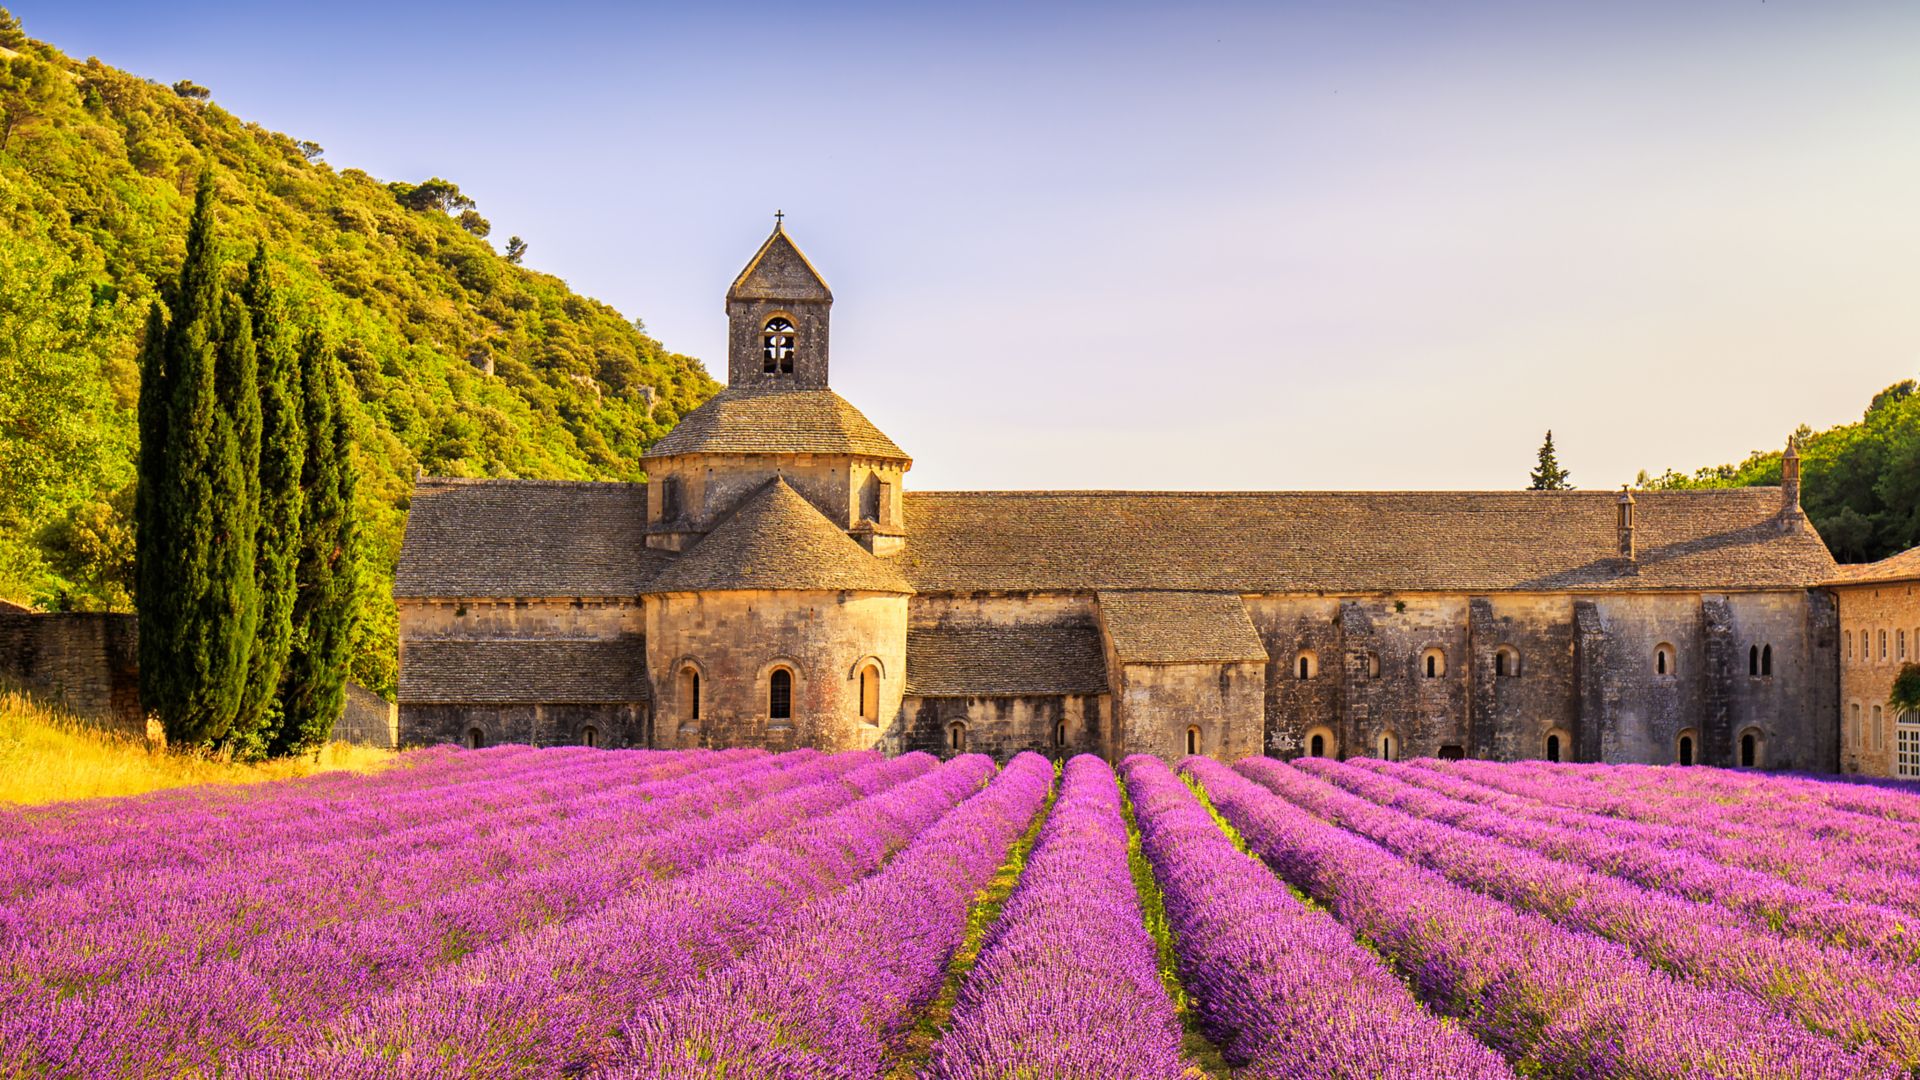 Abbey of Senanque and blooming rows lavender flowers panorama at sunset. Gordes, Luberon, Vaucluse, Provence, France, Europe.